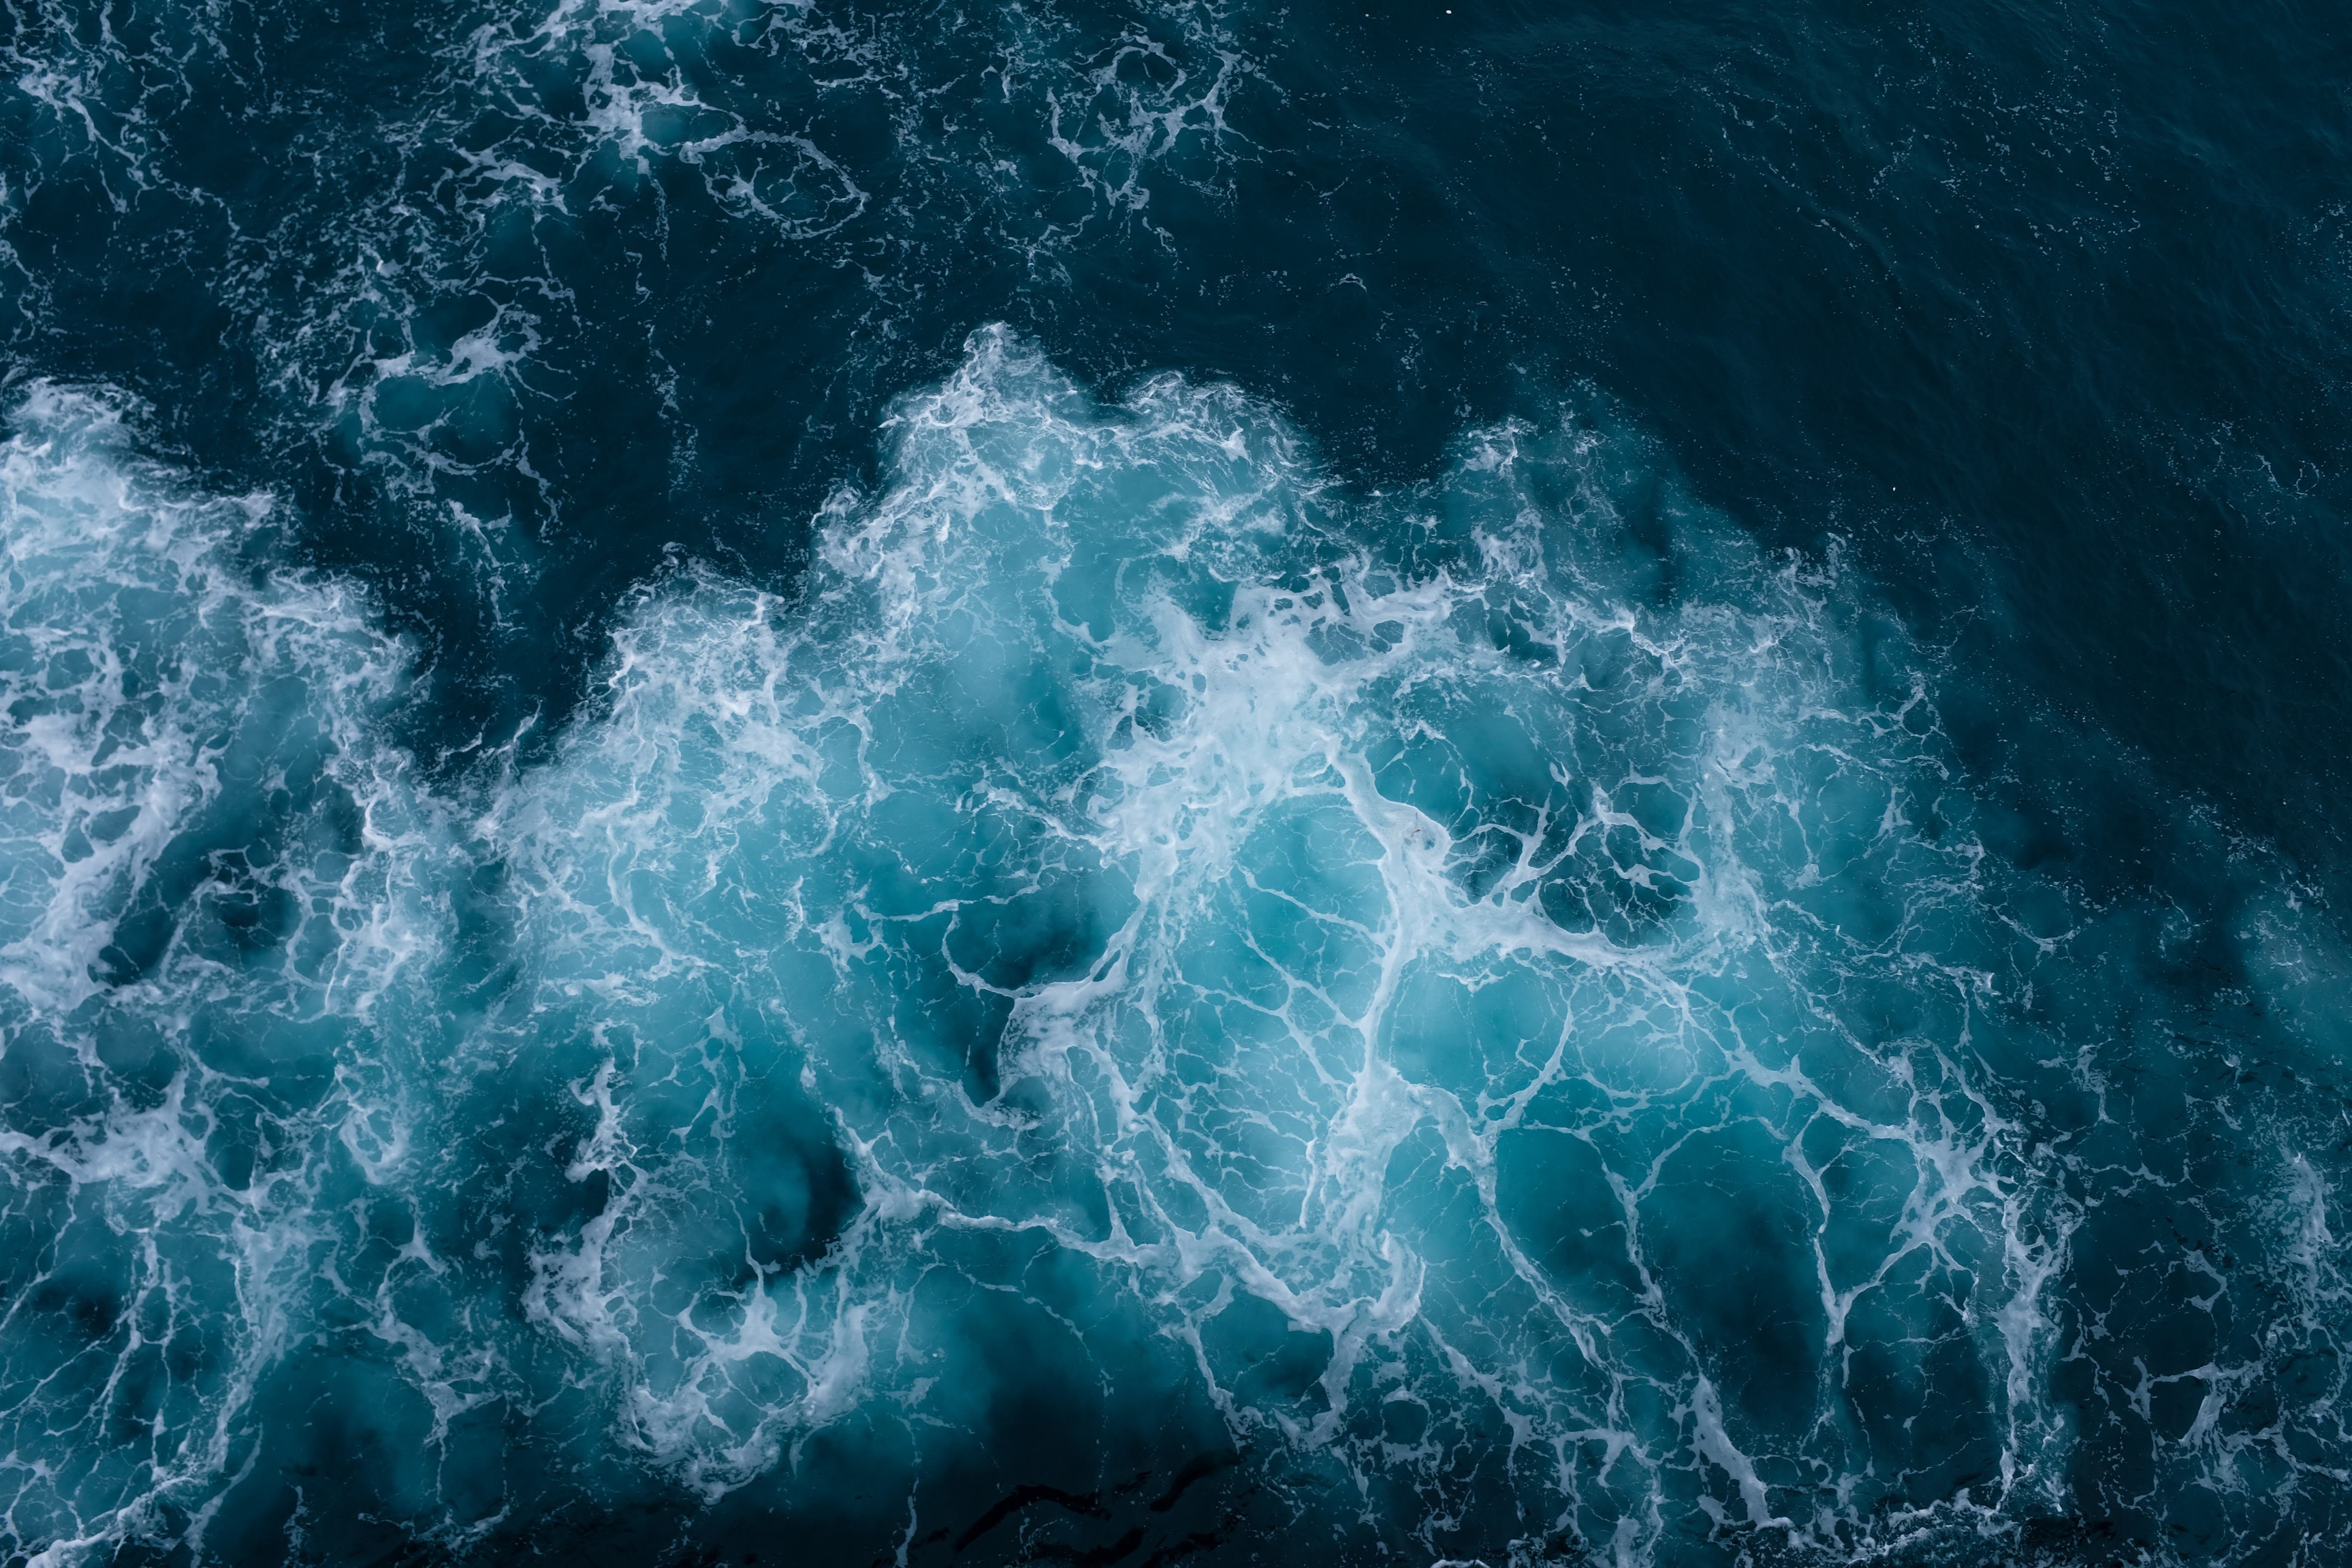 138515 download wallpaper ocean, nature, water, waves, view from above screensavers and pictures for free